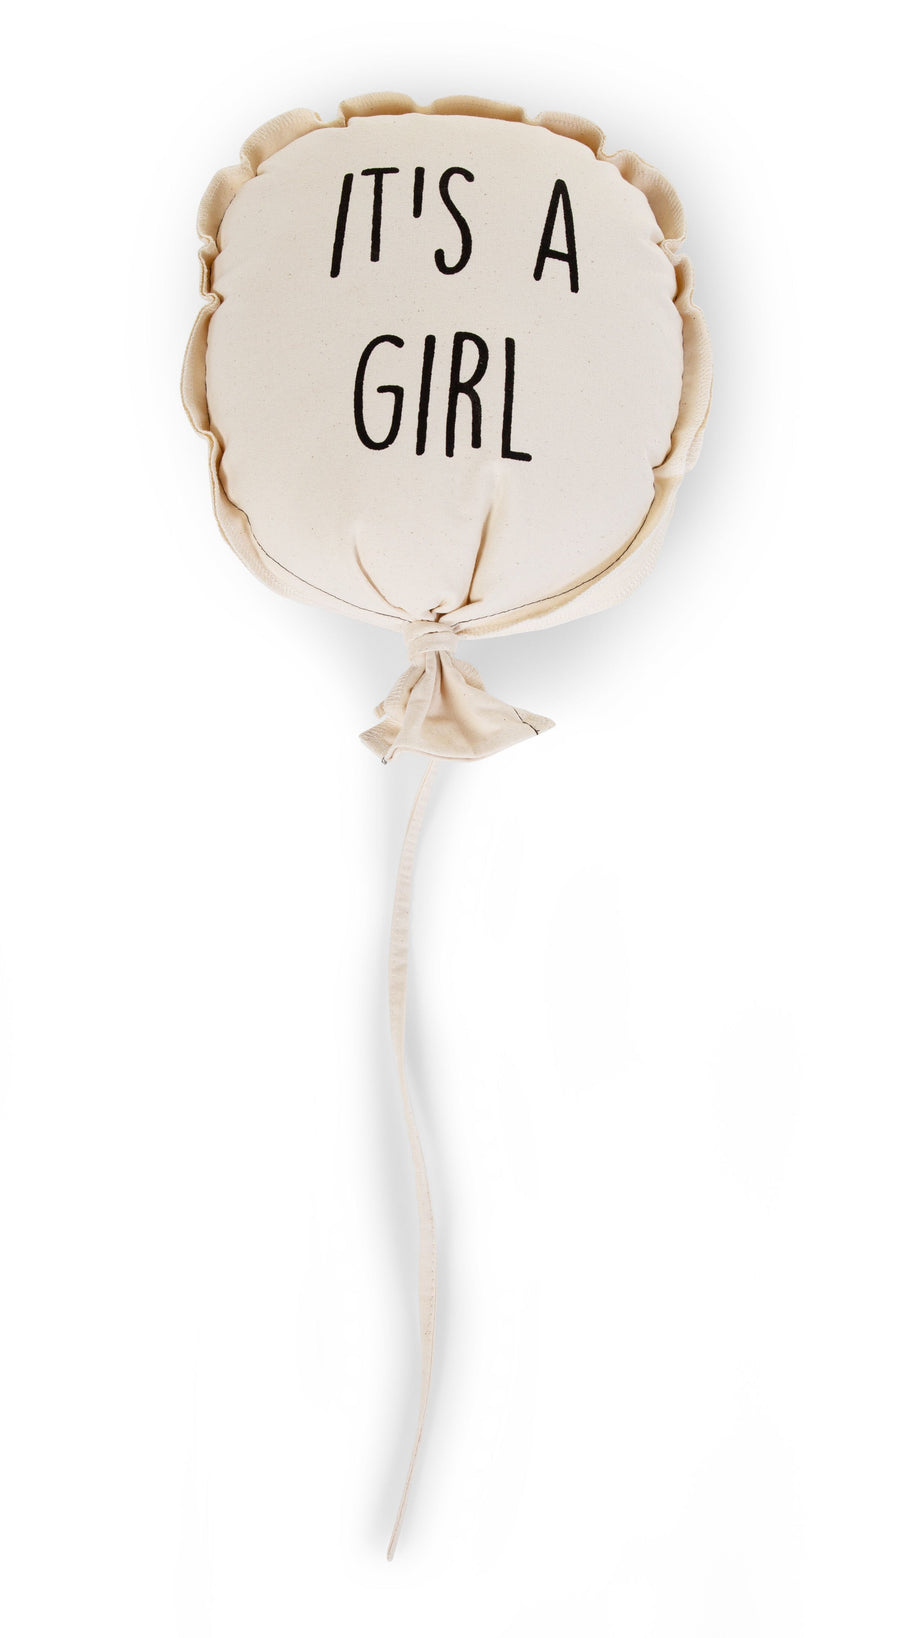 It's a Girl canvas balloon - Childhome